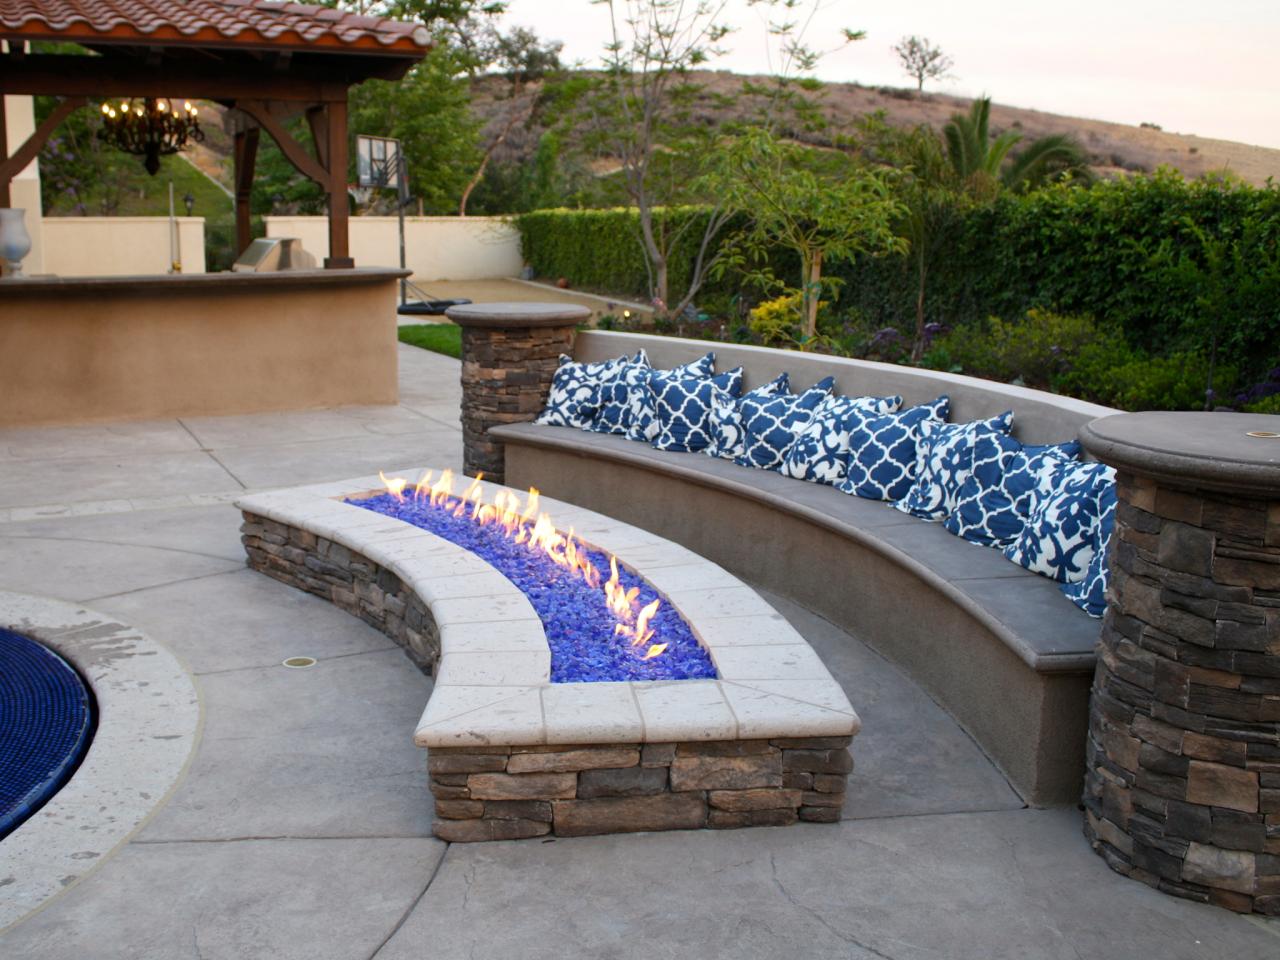 Designing A Patio Around Fire Pit Diy, How To Tile A Fire Pit